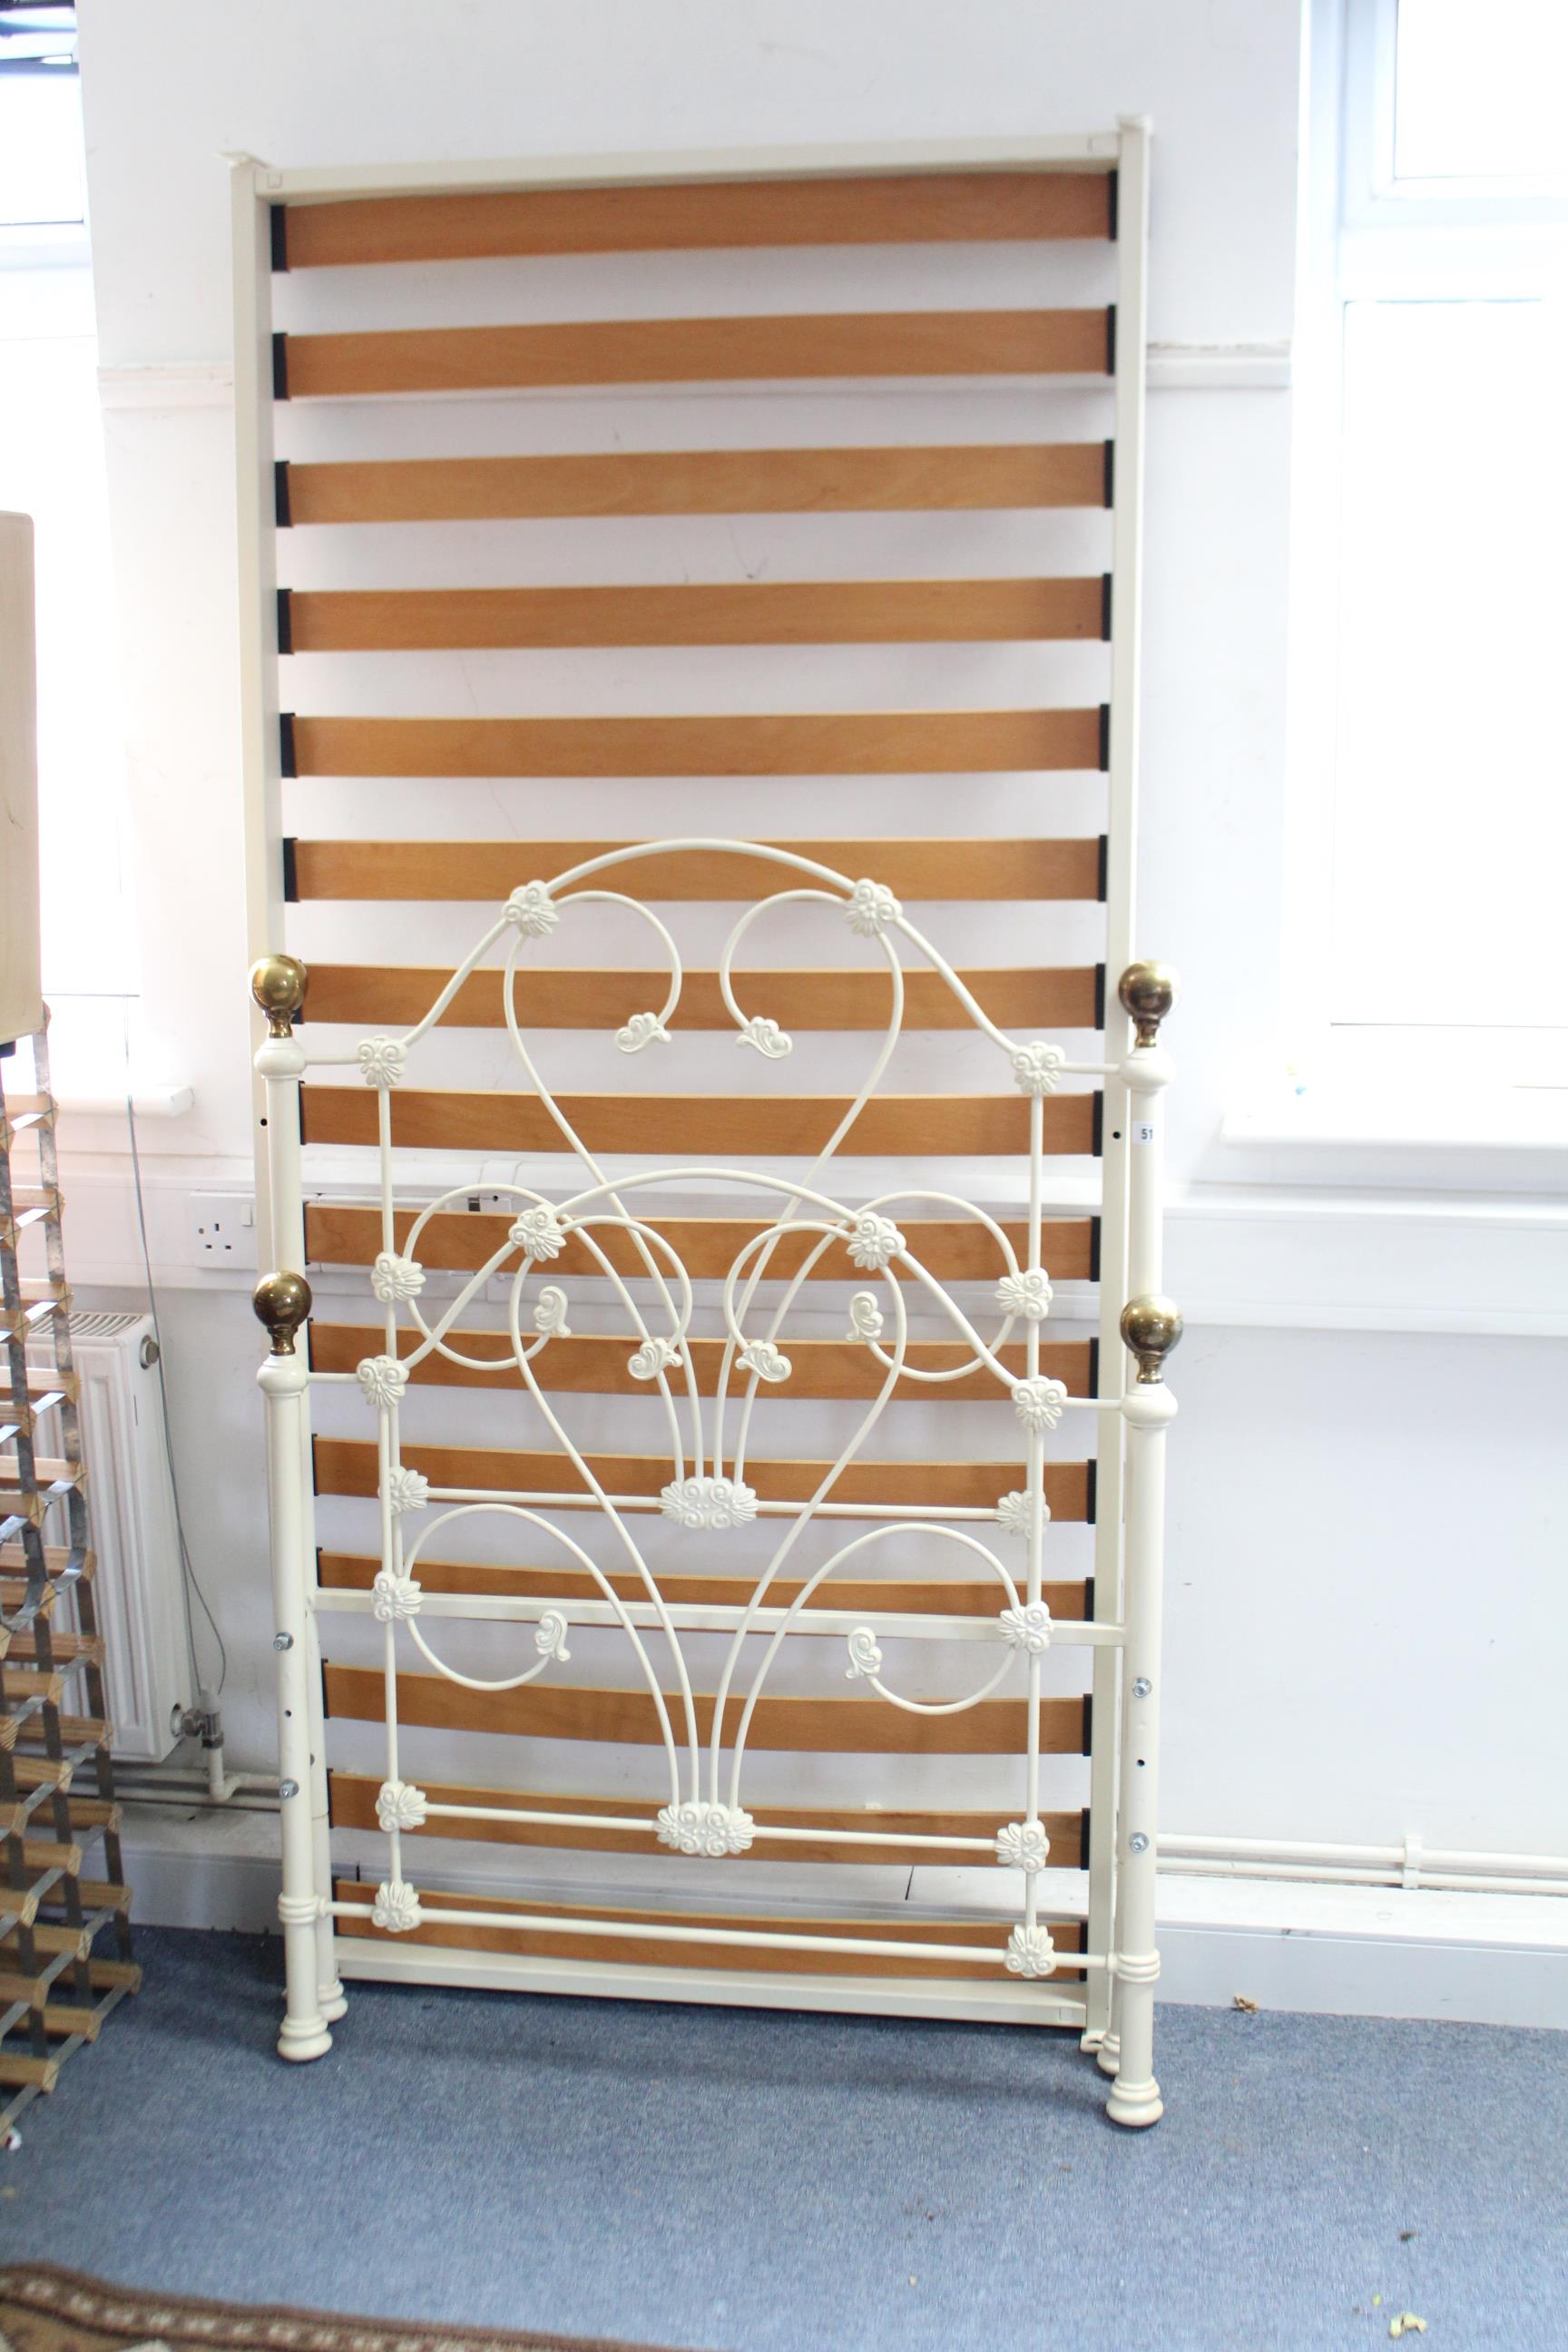 A Victorian-style 3’ bedstead. - Image 2 of 2